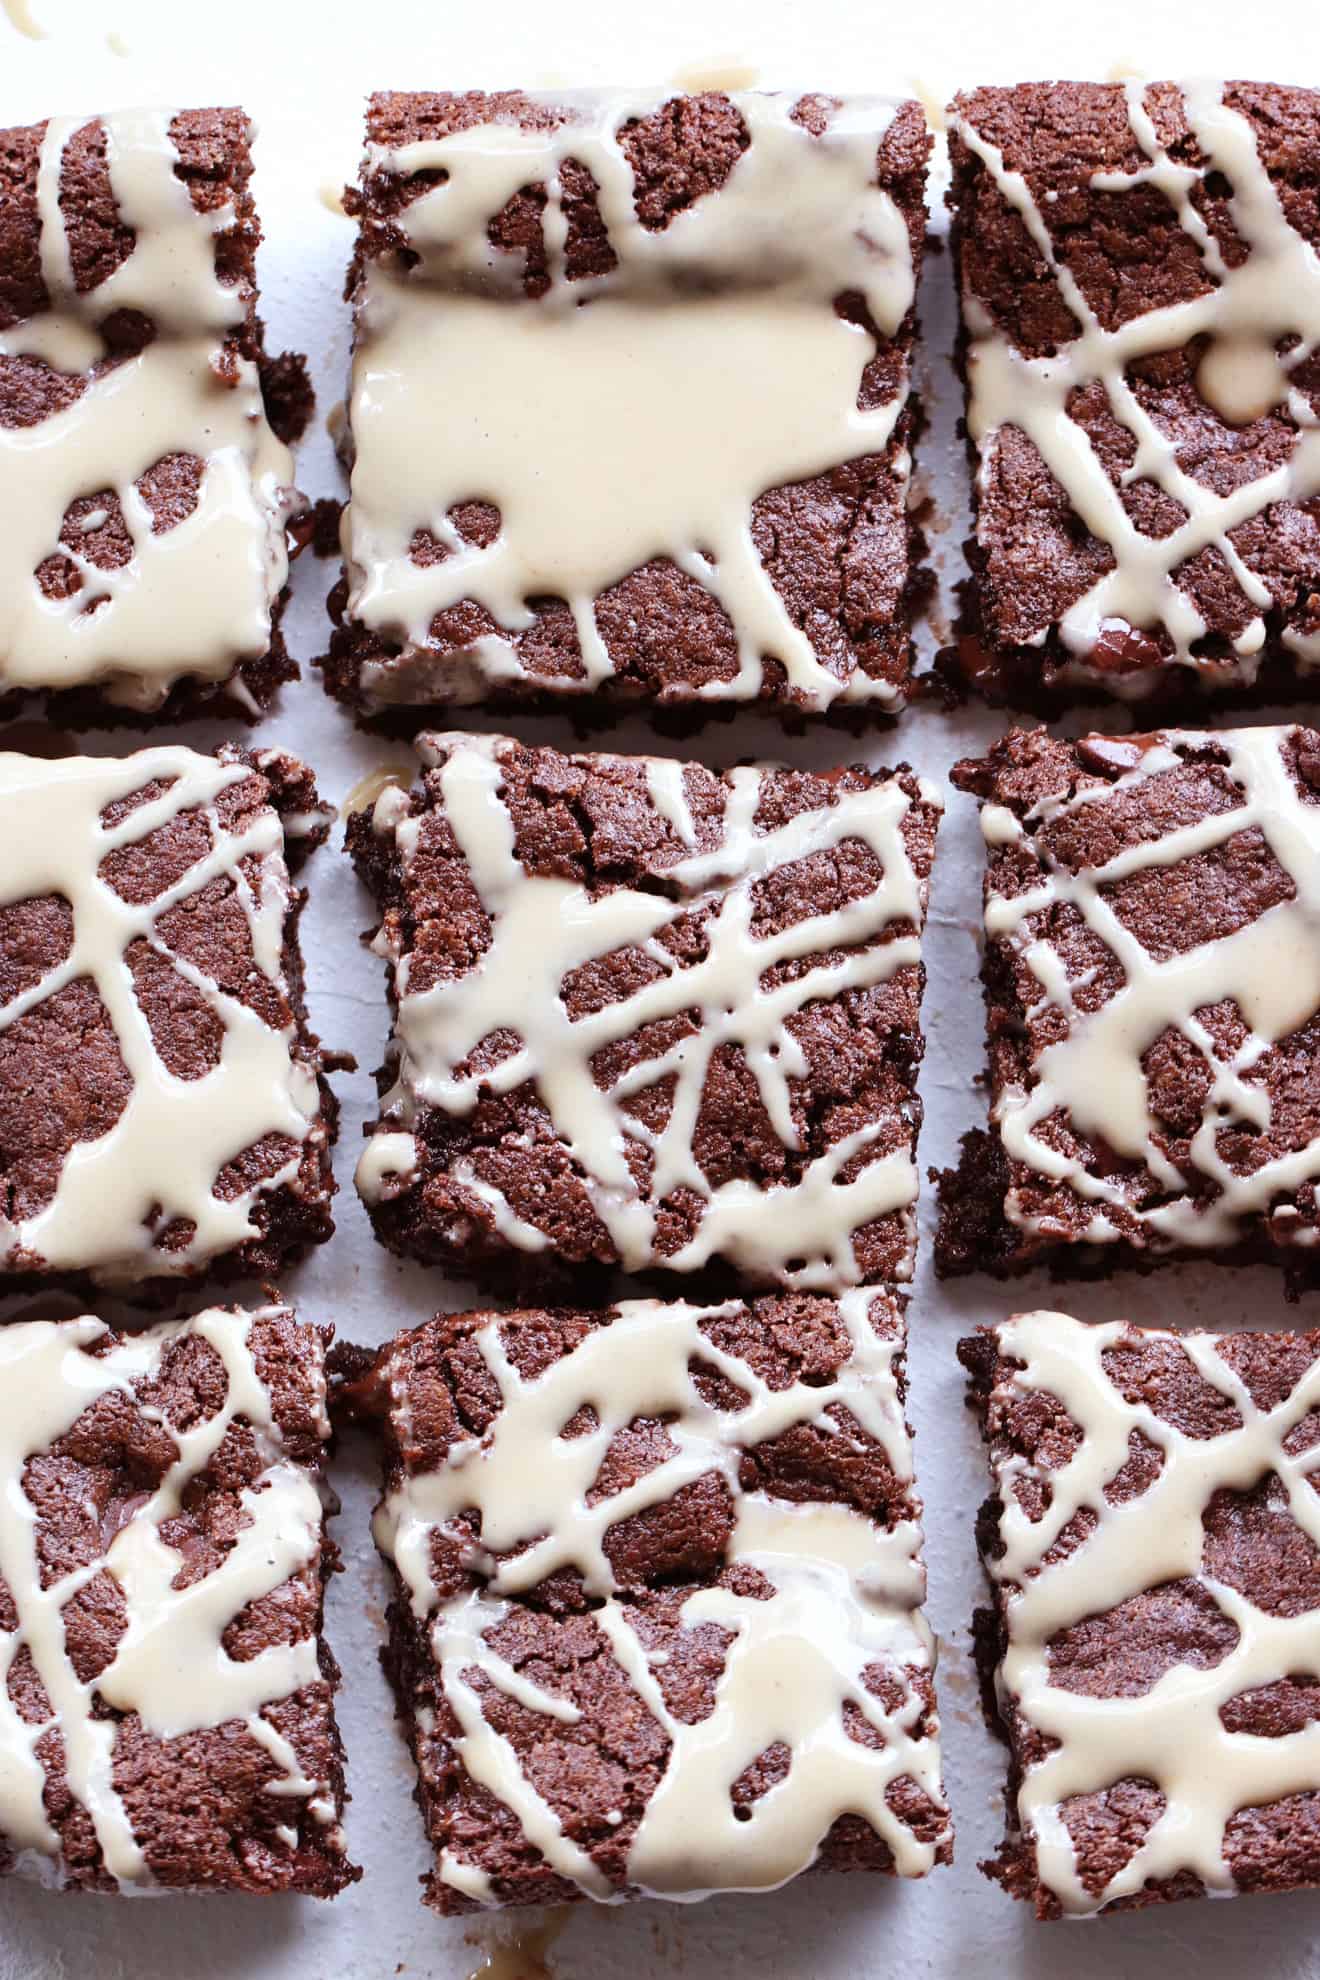 This is an overhead image of tahini brownies cut into squares. The brownies are drizzled with tahini in a criss-cross pattern.